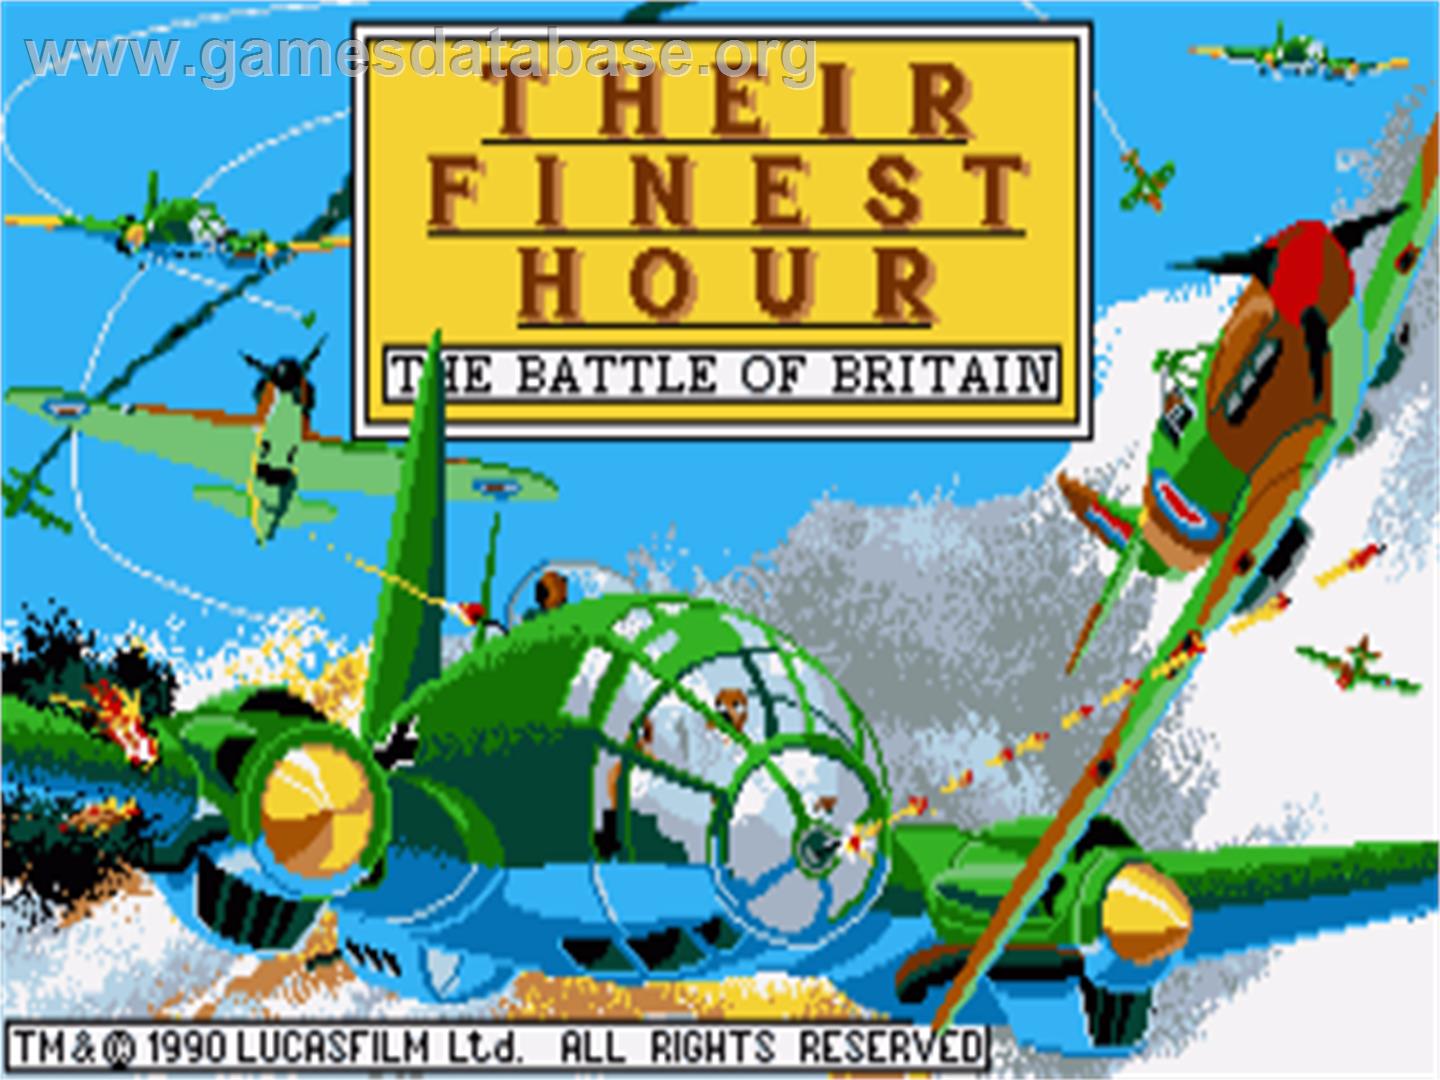 Their Finest Hour: The Battle of Britain - Commodore Amiga - Artwork - Title Screen